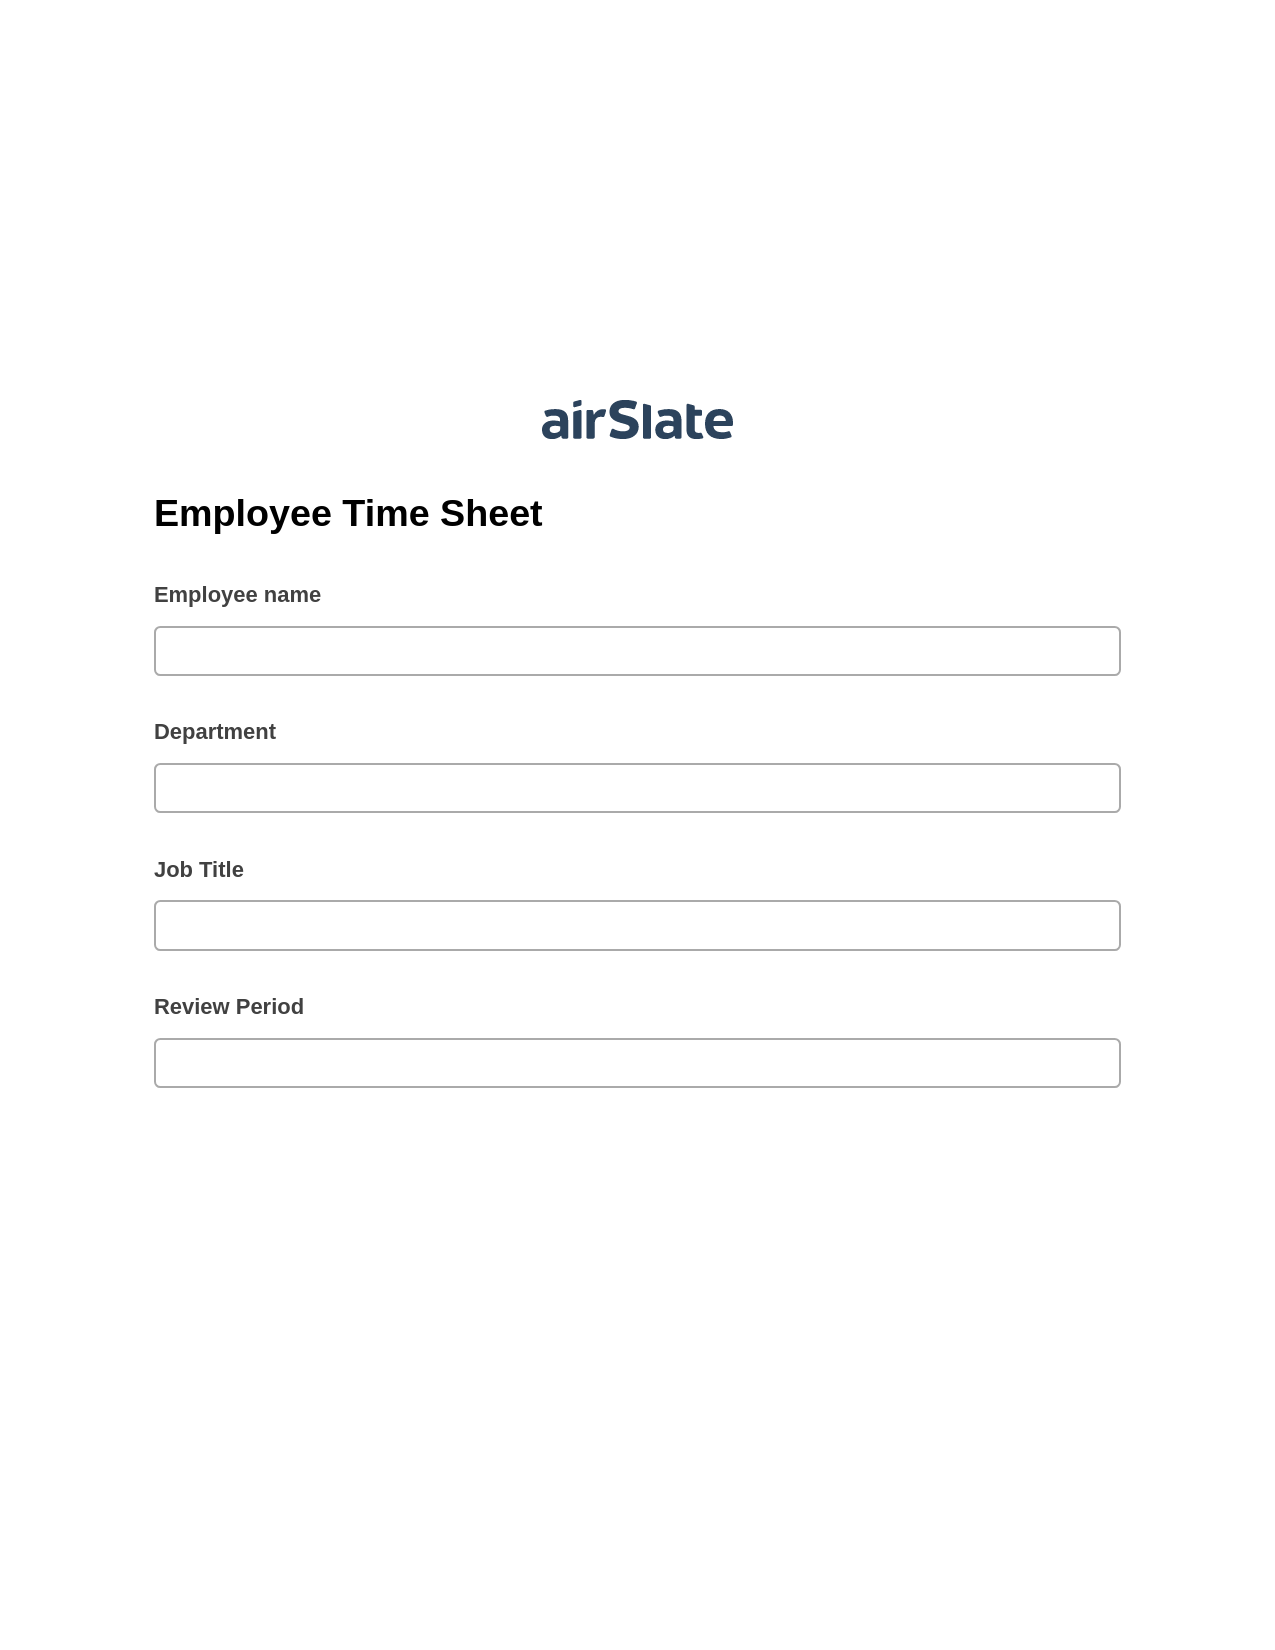 Multirole Employee Time Sheet Pre-fill from Salesforce Records Bot, Custom Field's Value Bot, Export to Salesforce Record Bot